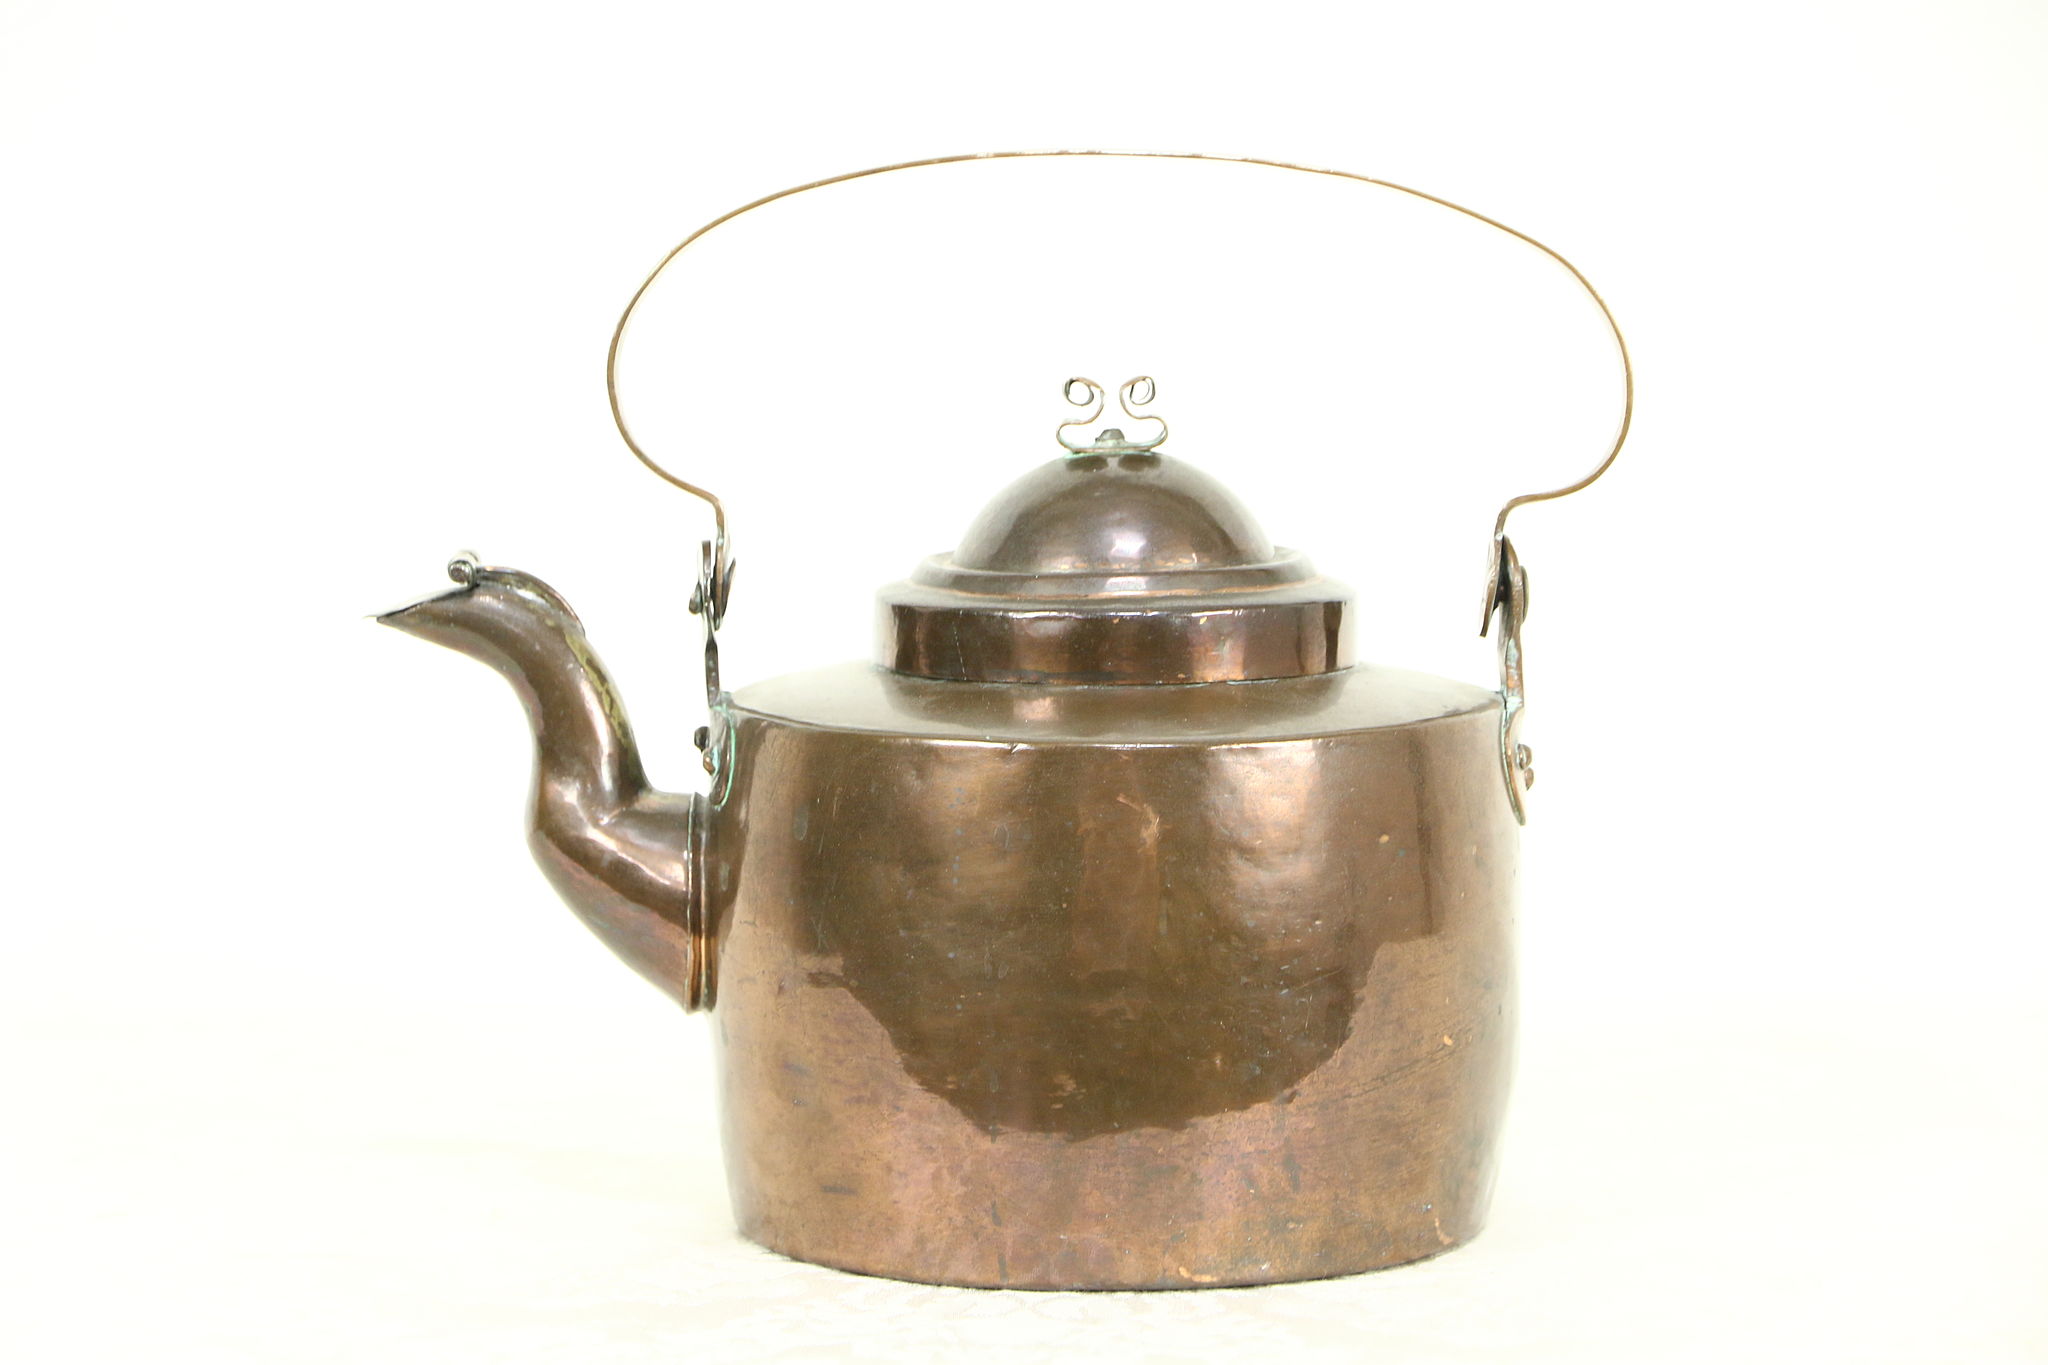 English Antique Hot Toddy Brass Tea Pot or Kettle, C & B #45102